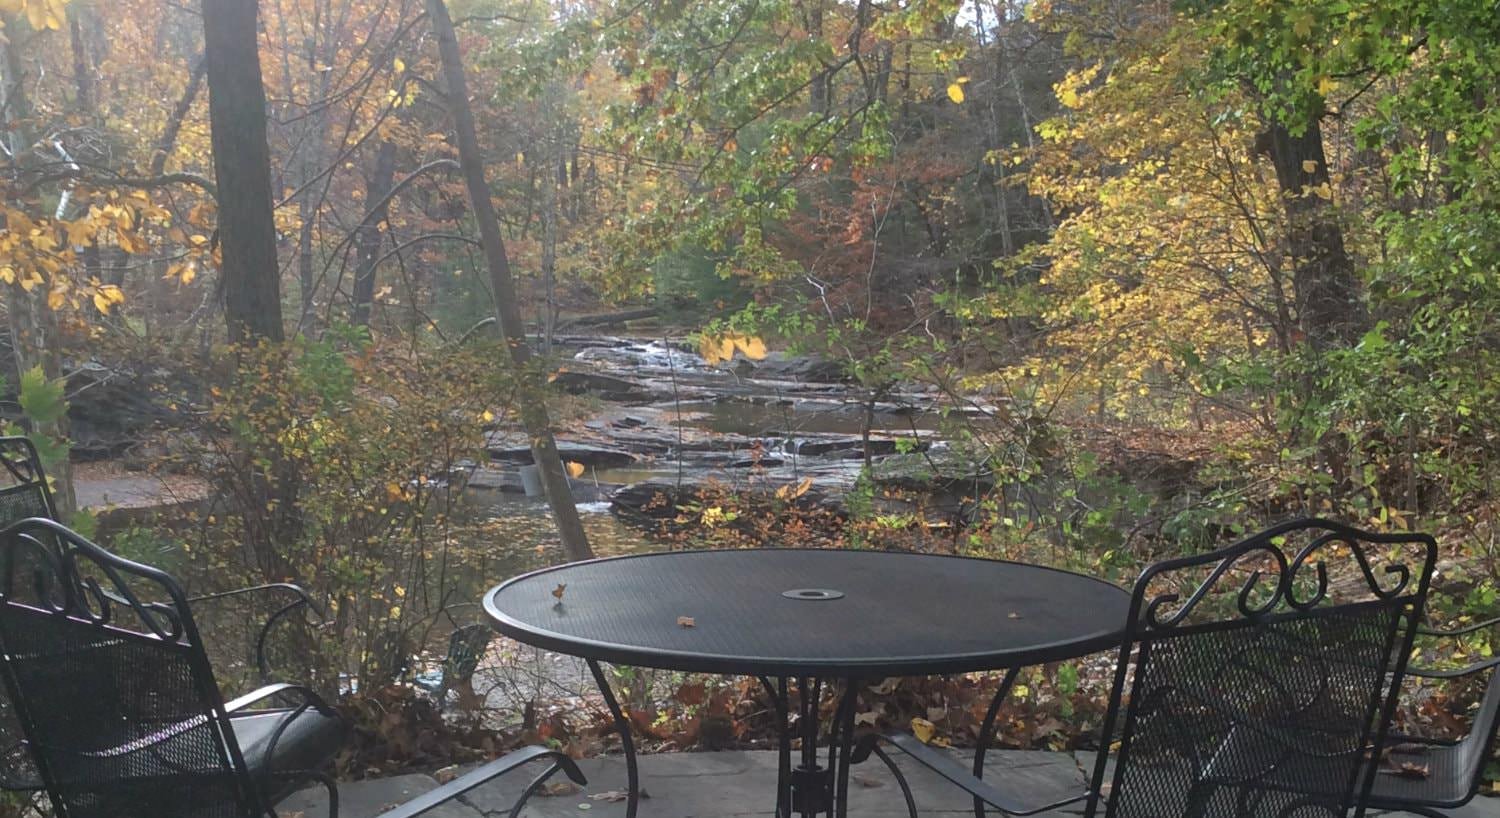 Black round metal table and chairs on a patio overlooking a stream and the woods with trees changing colors